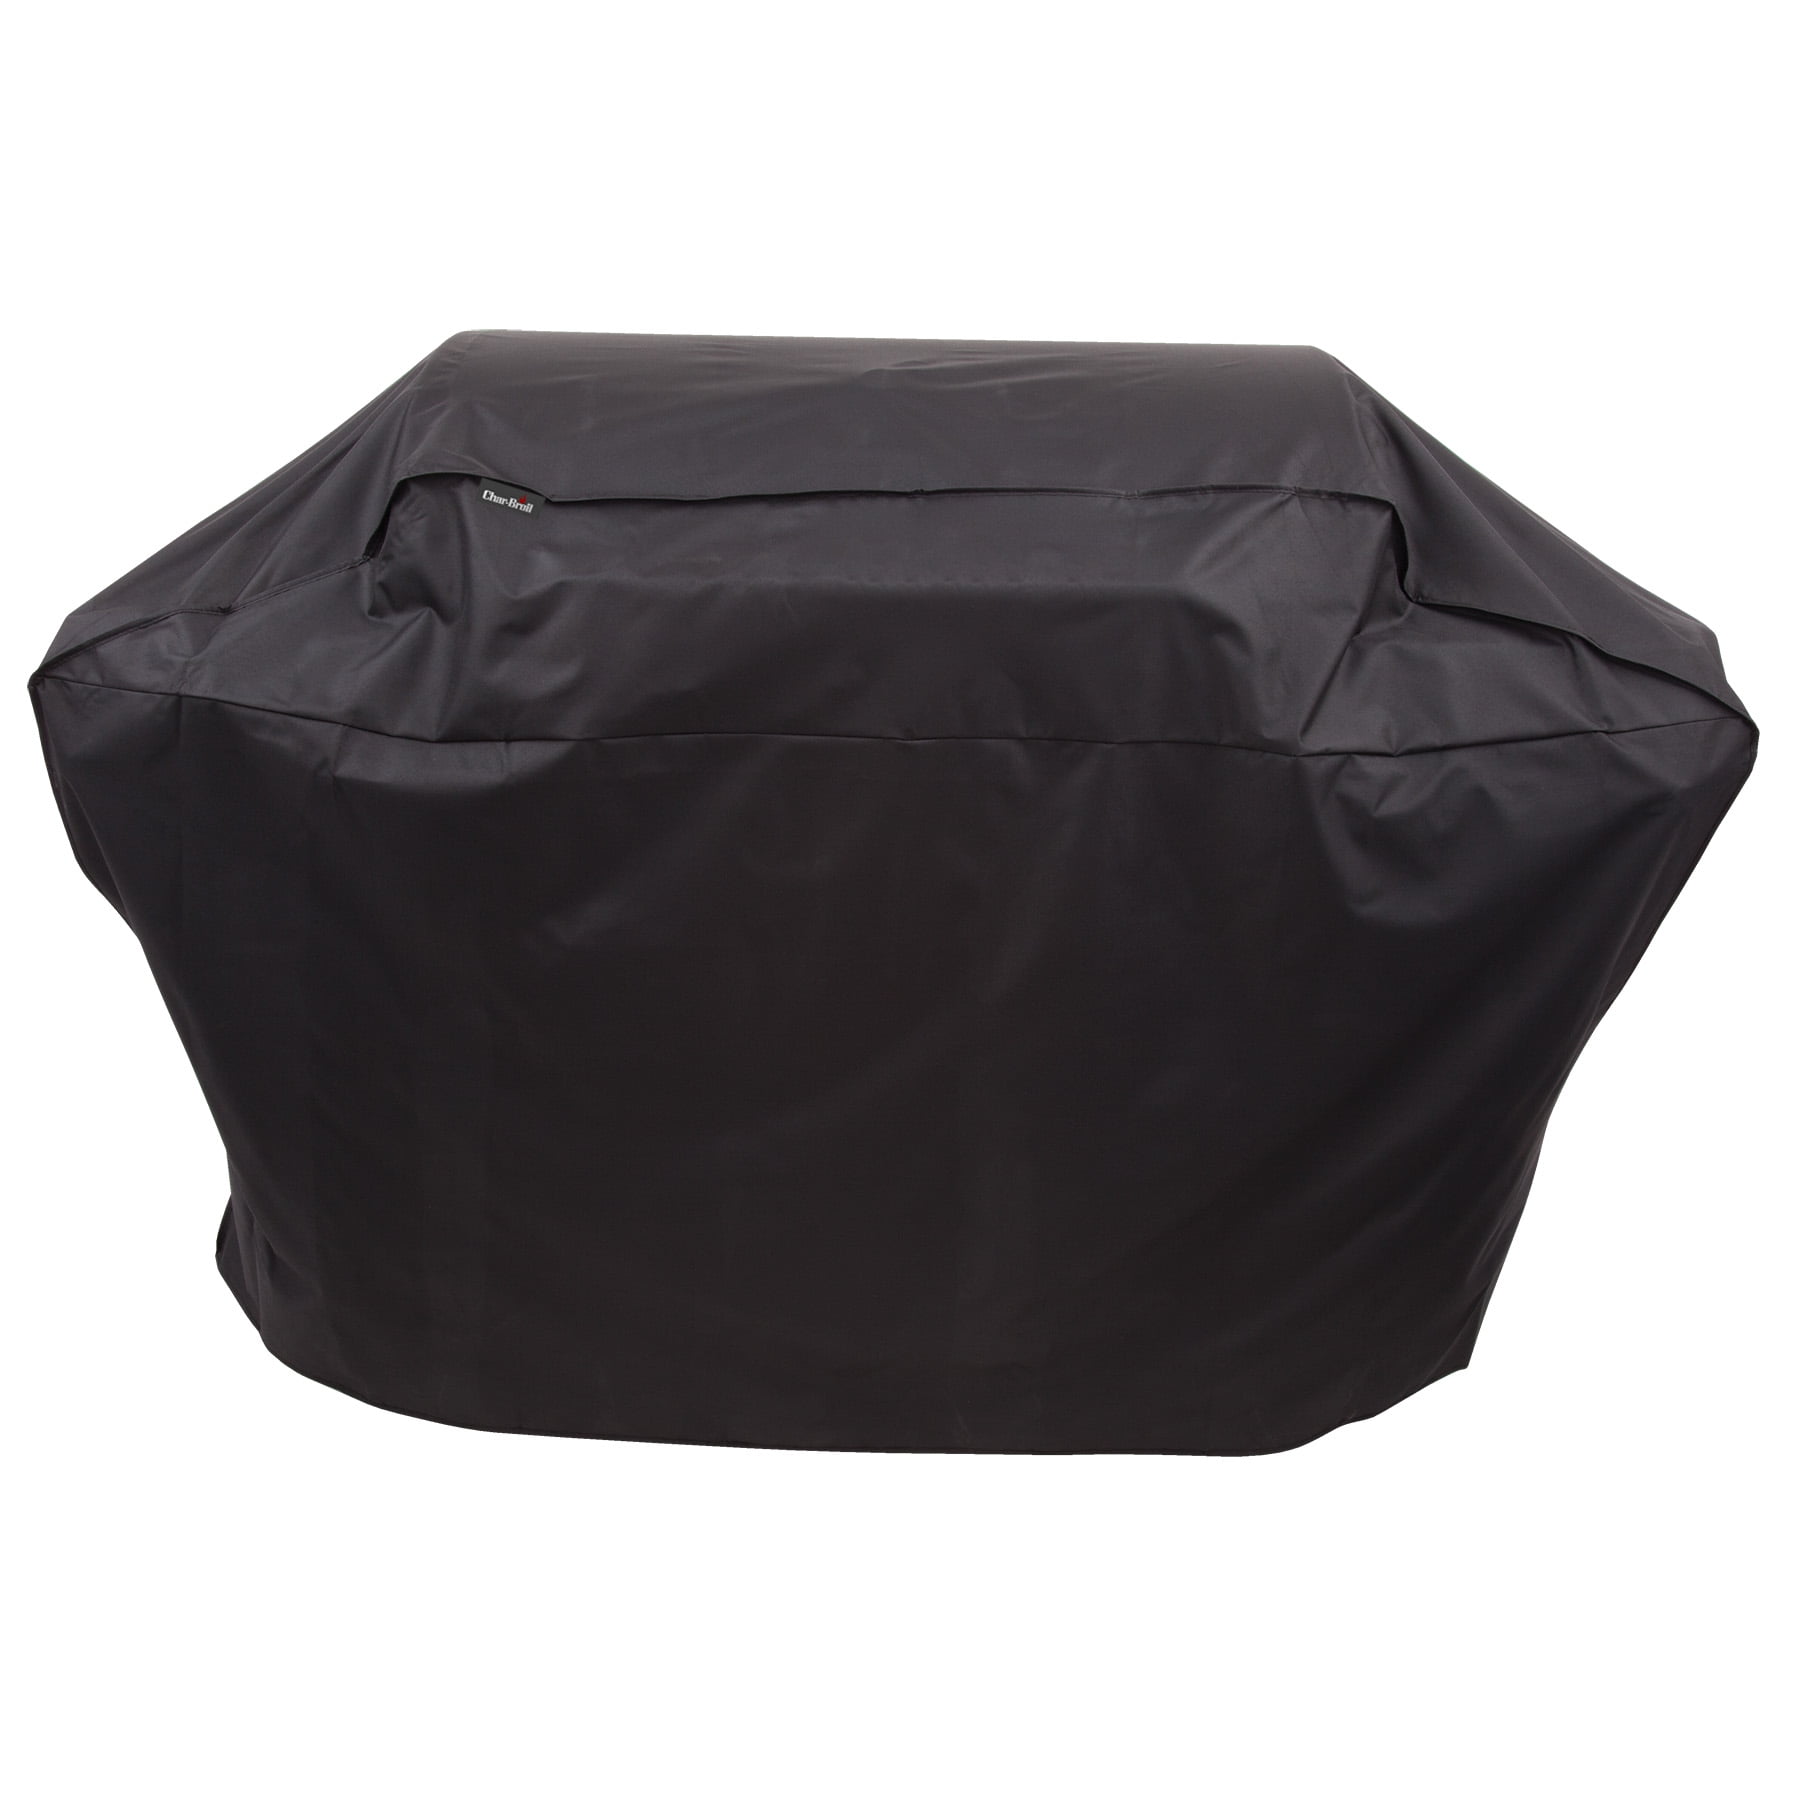 Char-Broil Universal Vinyl Grill Cover Large 62 Inches Fits All Brands 